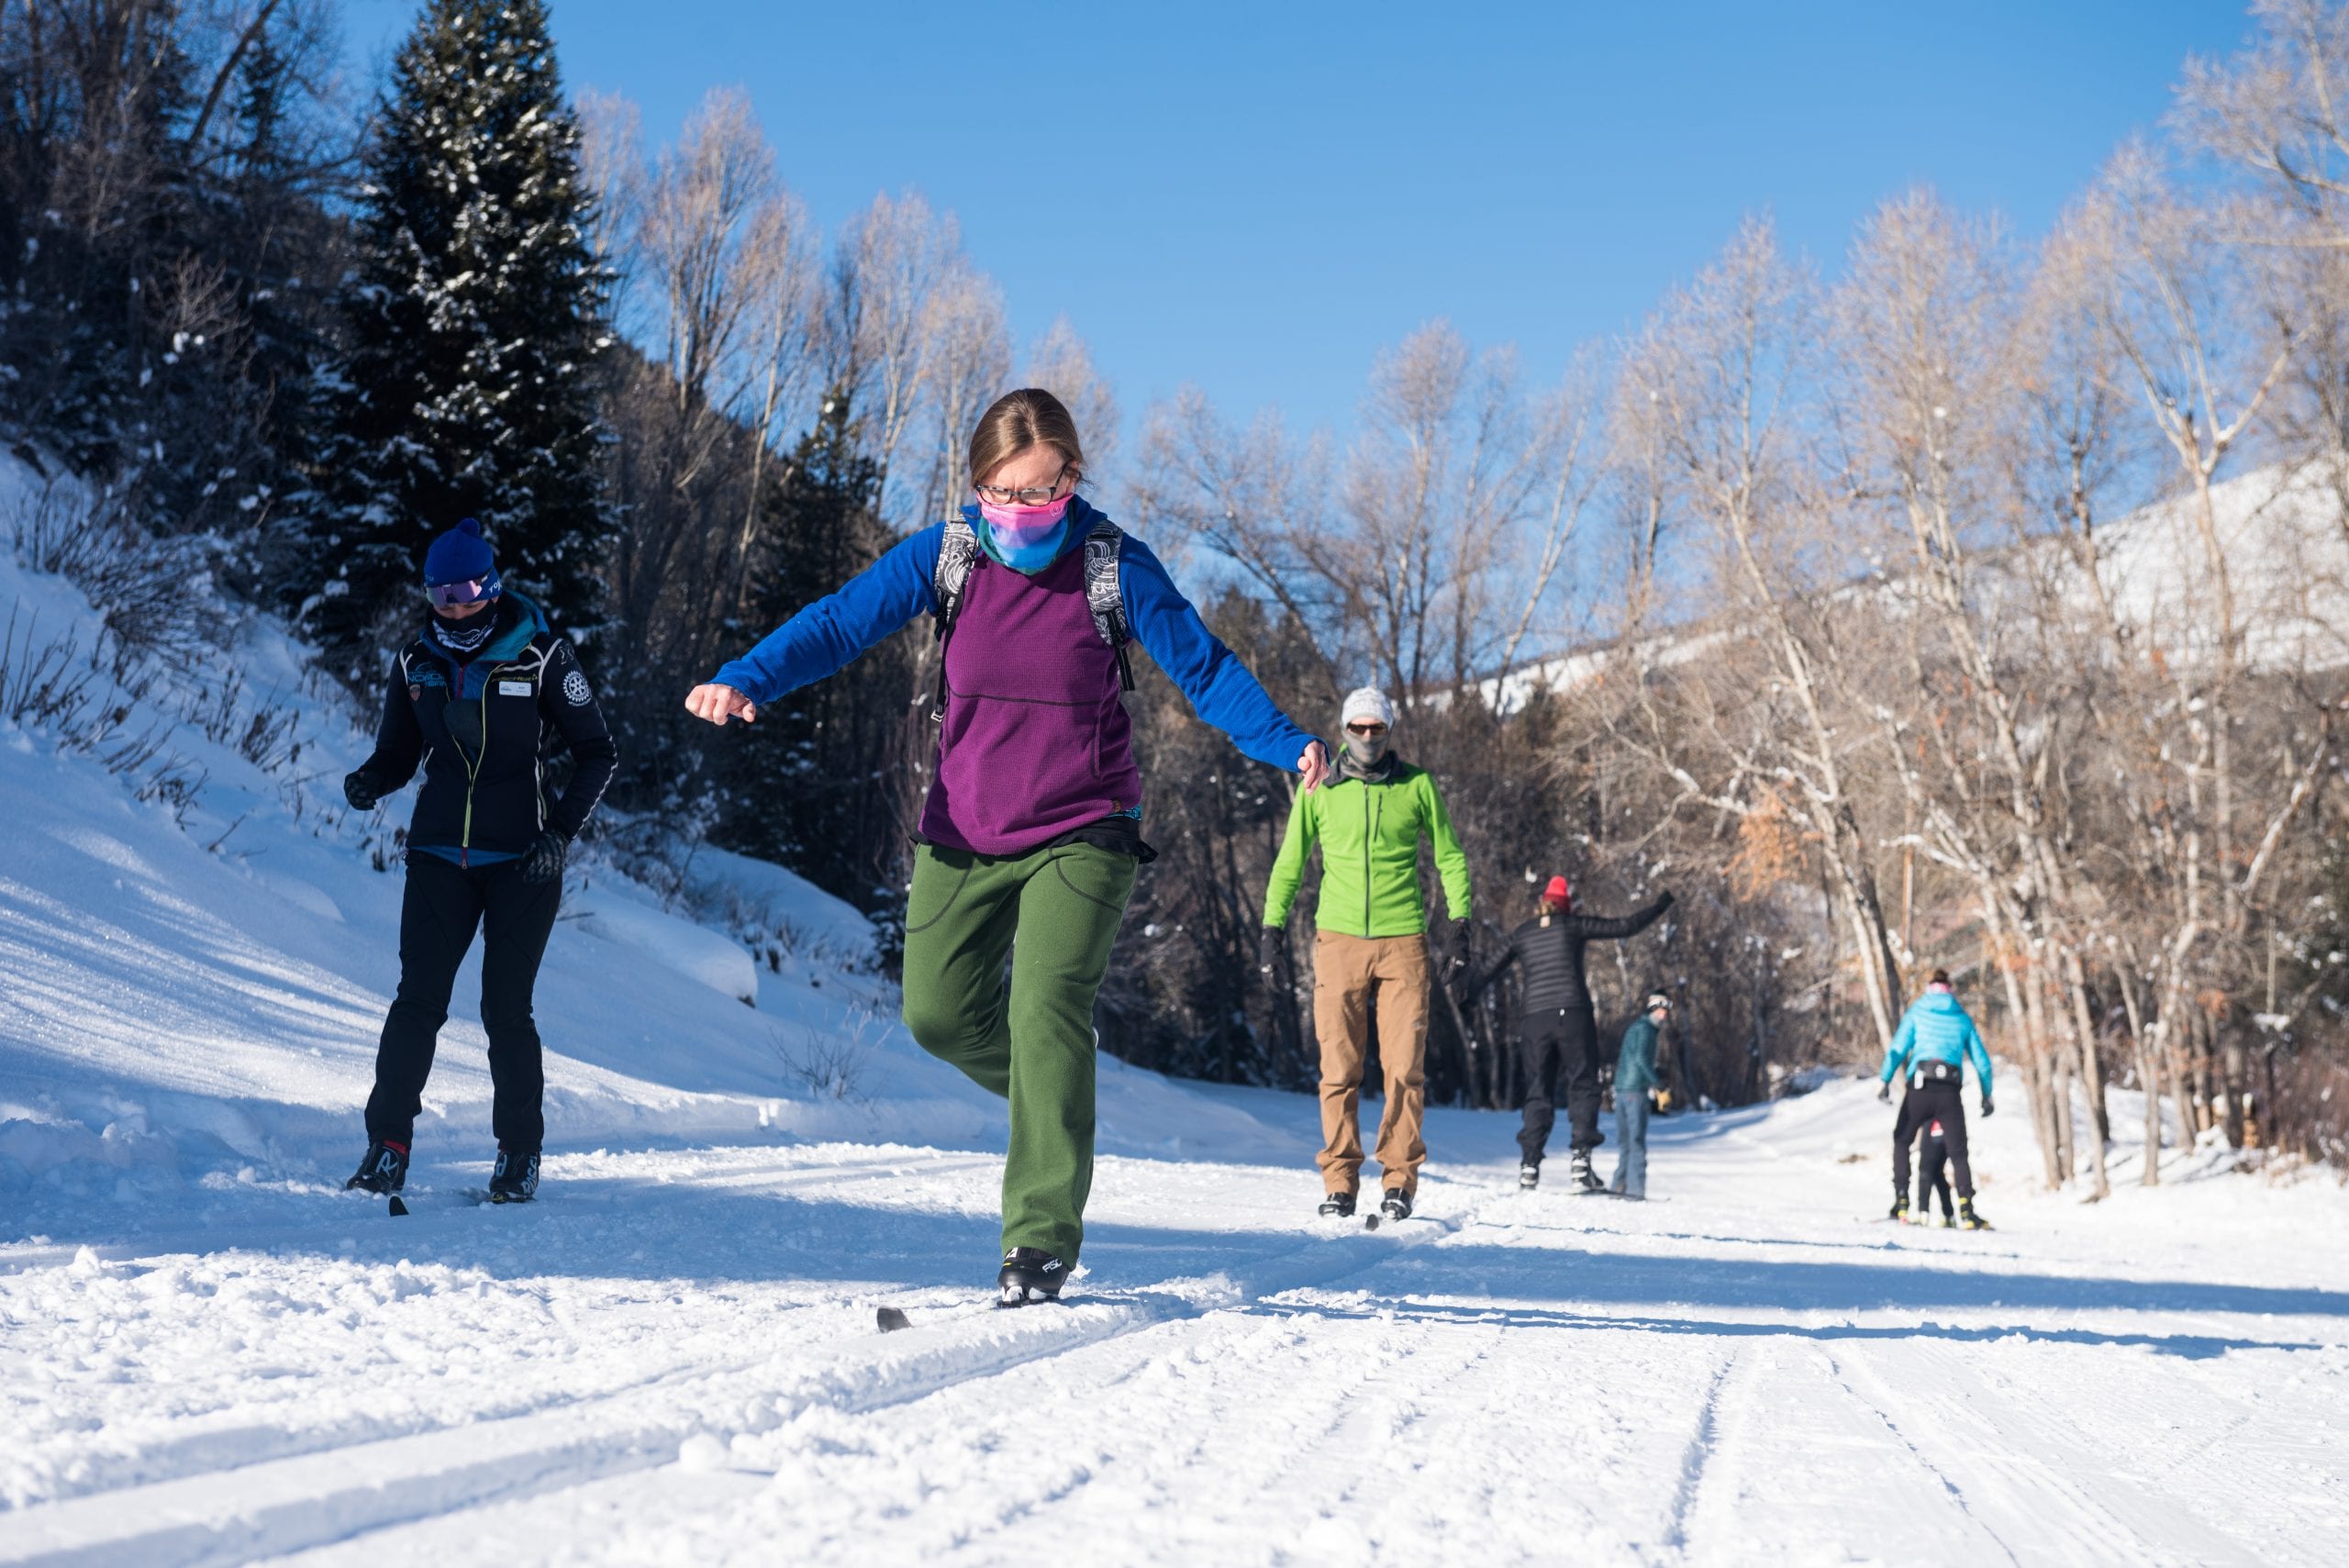 Beginner classic ski lesson at Crested Butte Nordic